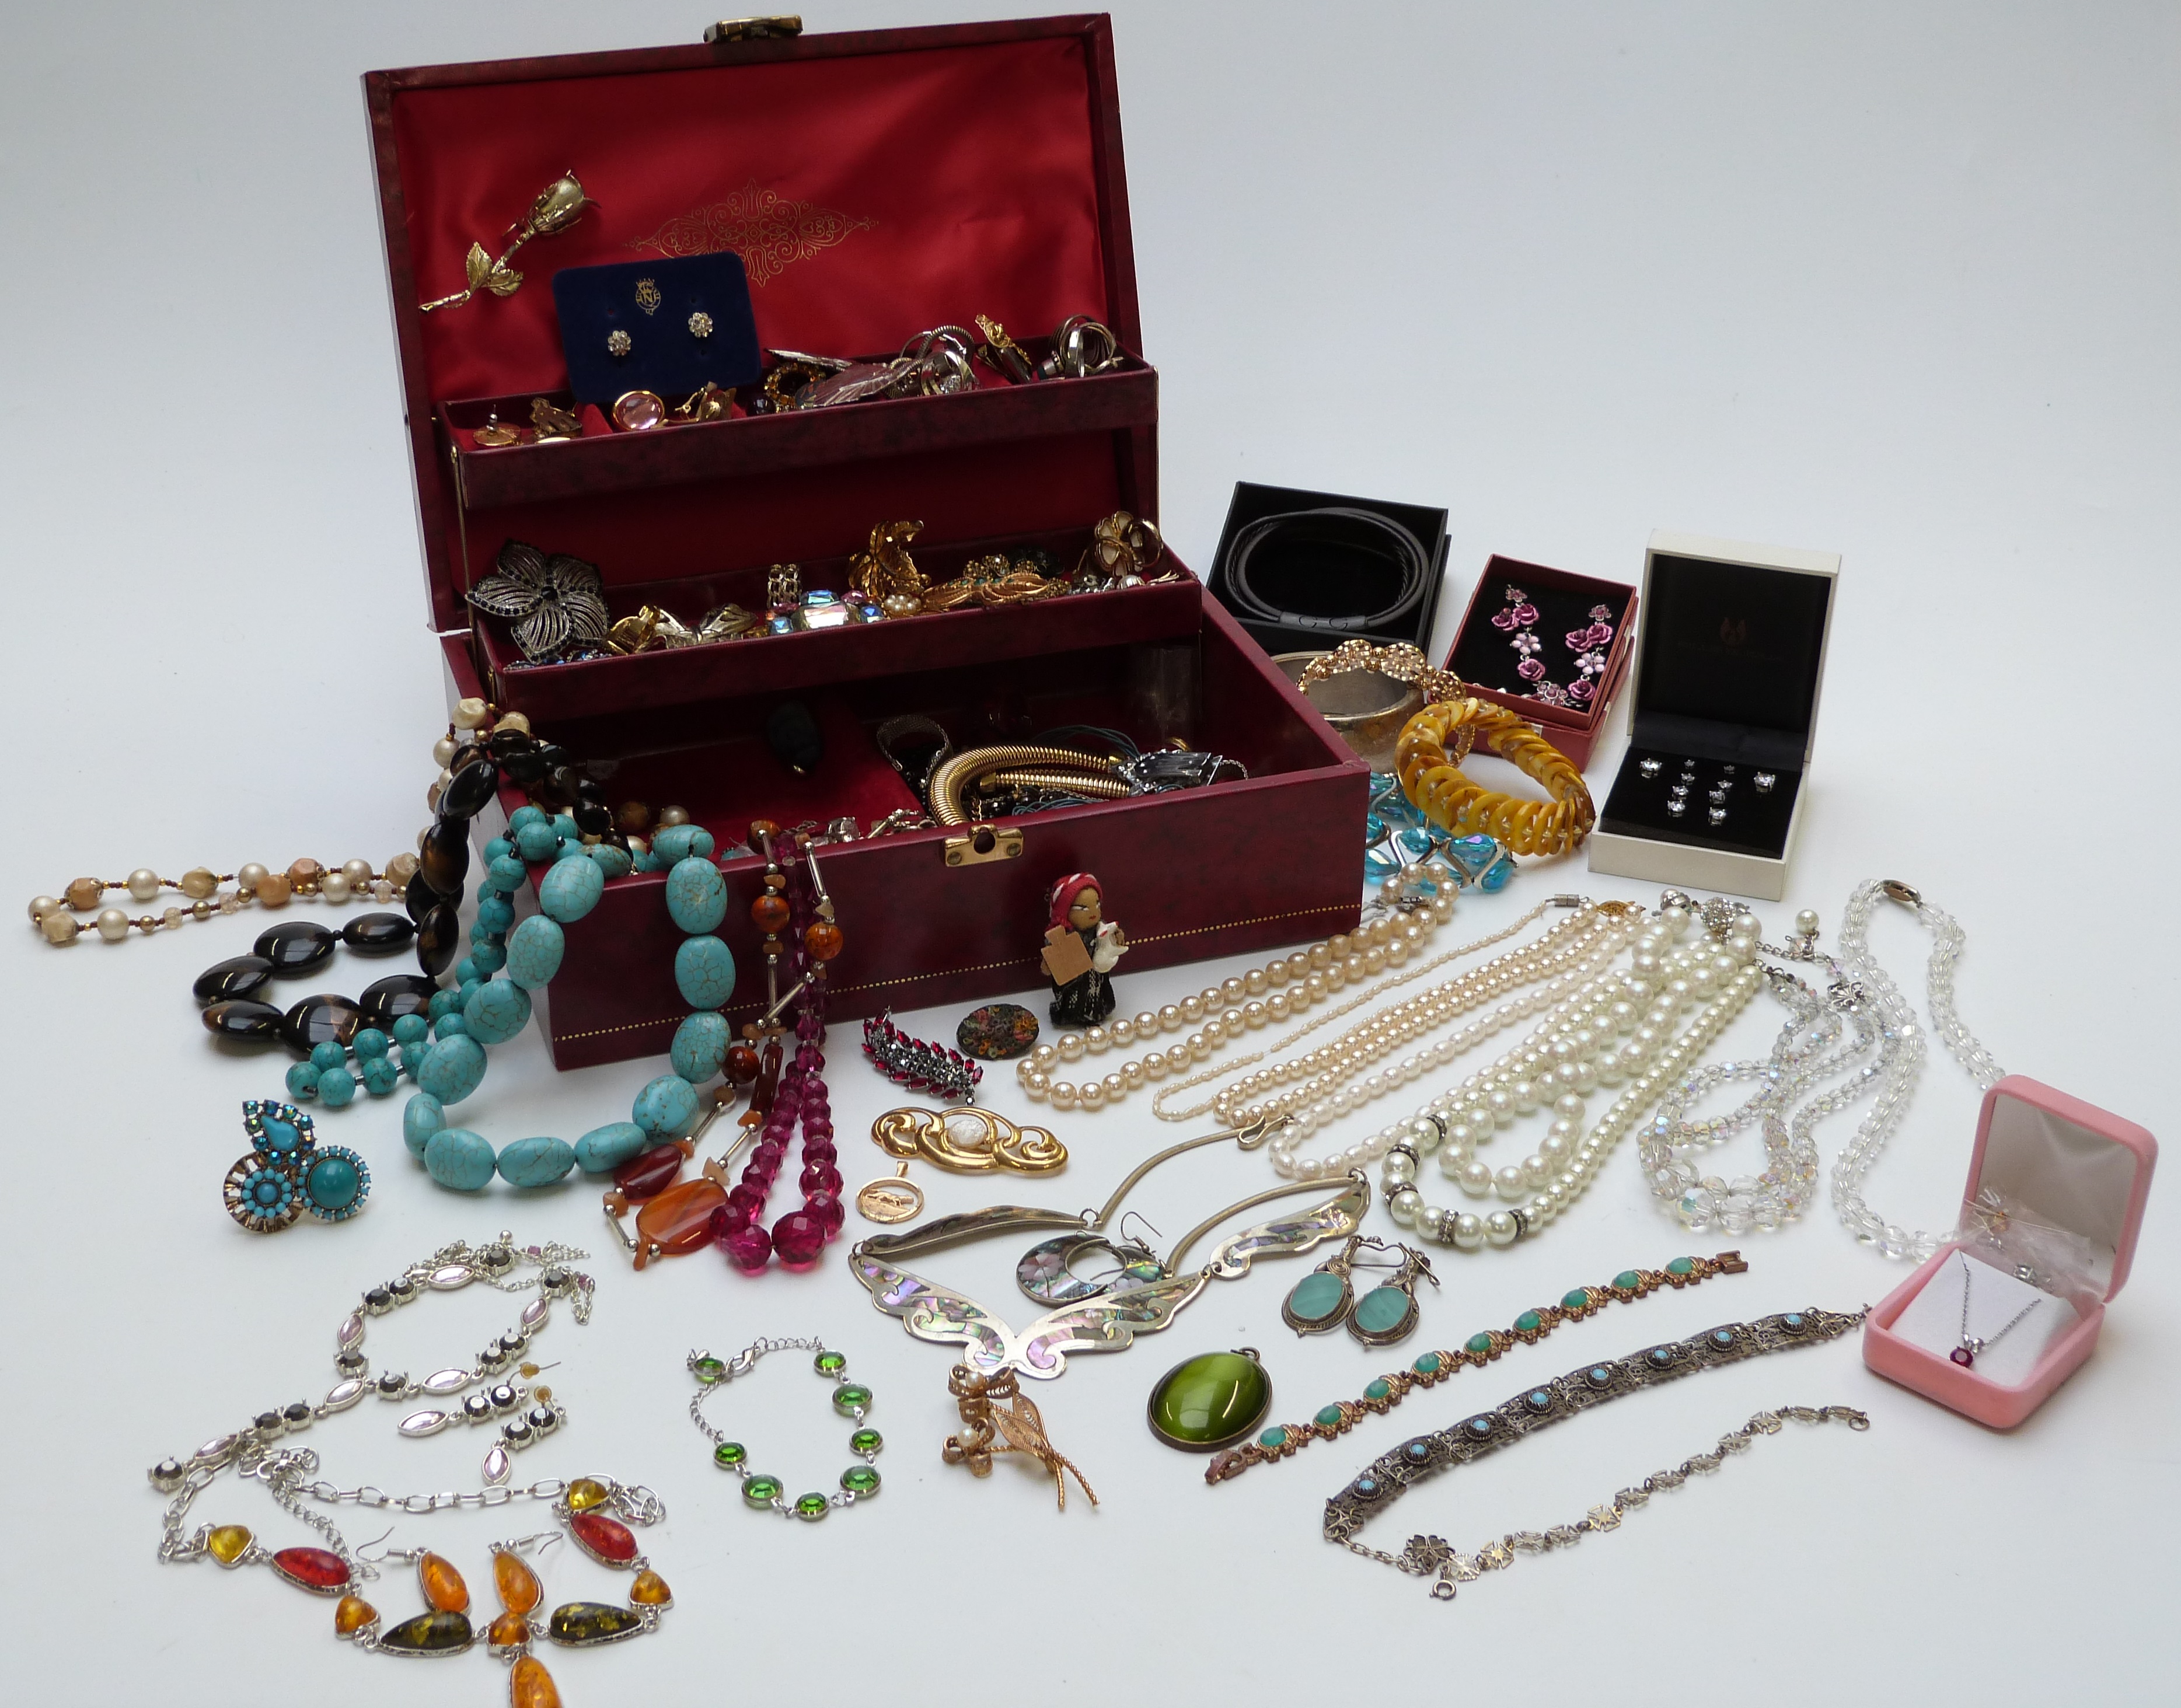 A collection of costume jewellery including rings, vintage earrings including Swarovski and Trifari,